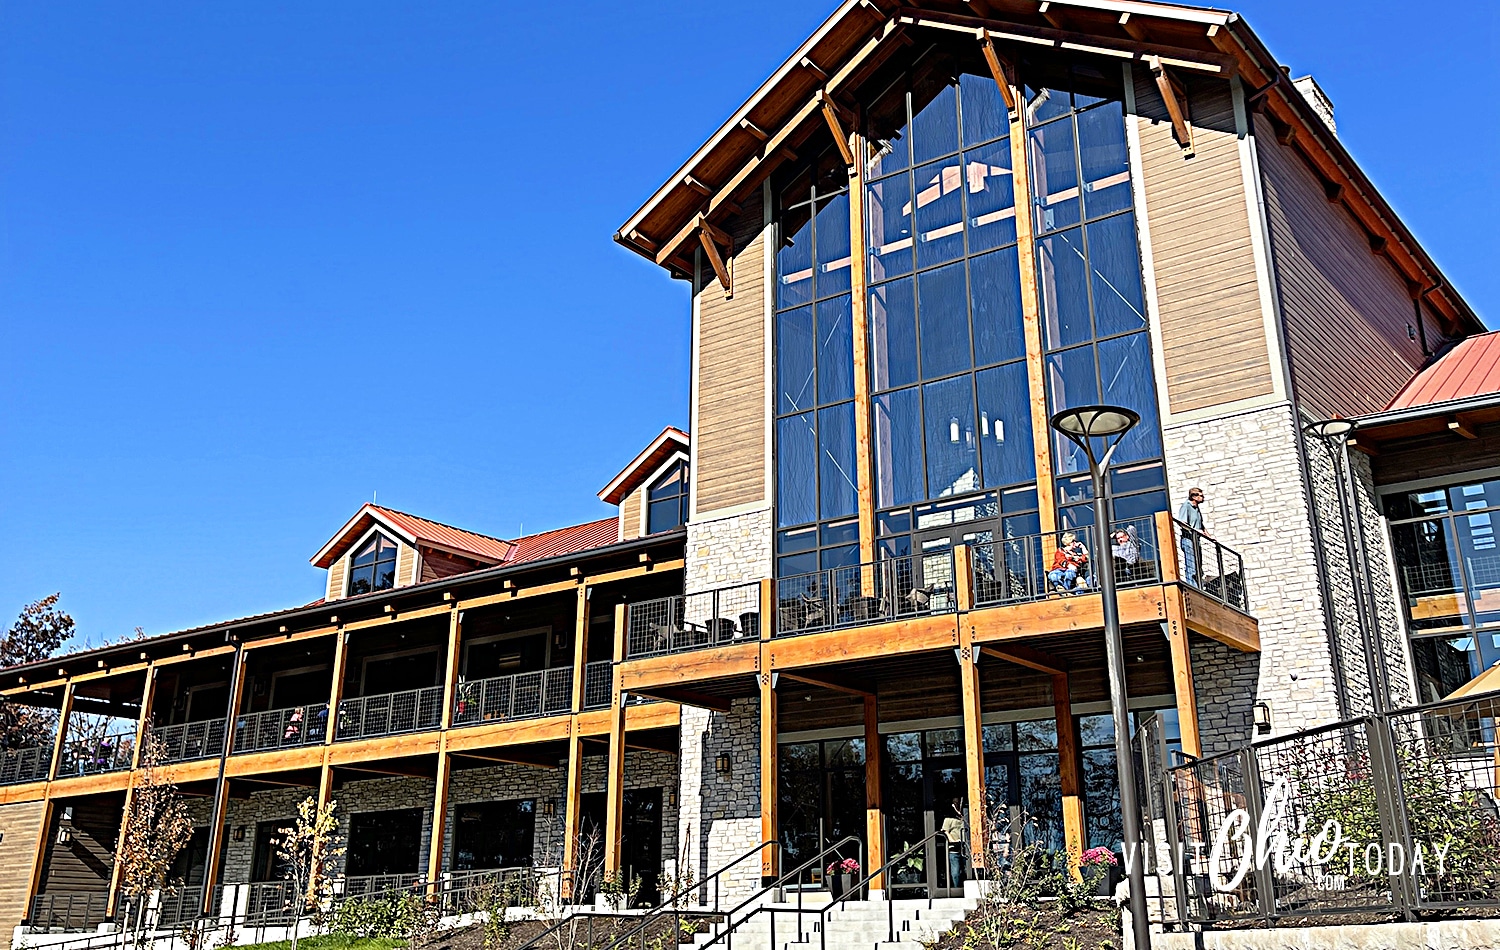 horizontal image of the front of Hocking Hills Lodge with a very blue sky in the background. Photo credit: Cindy Gordon of VisitOhioToday.com